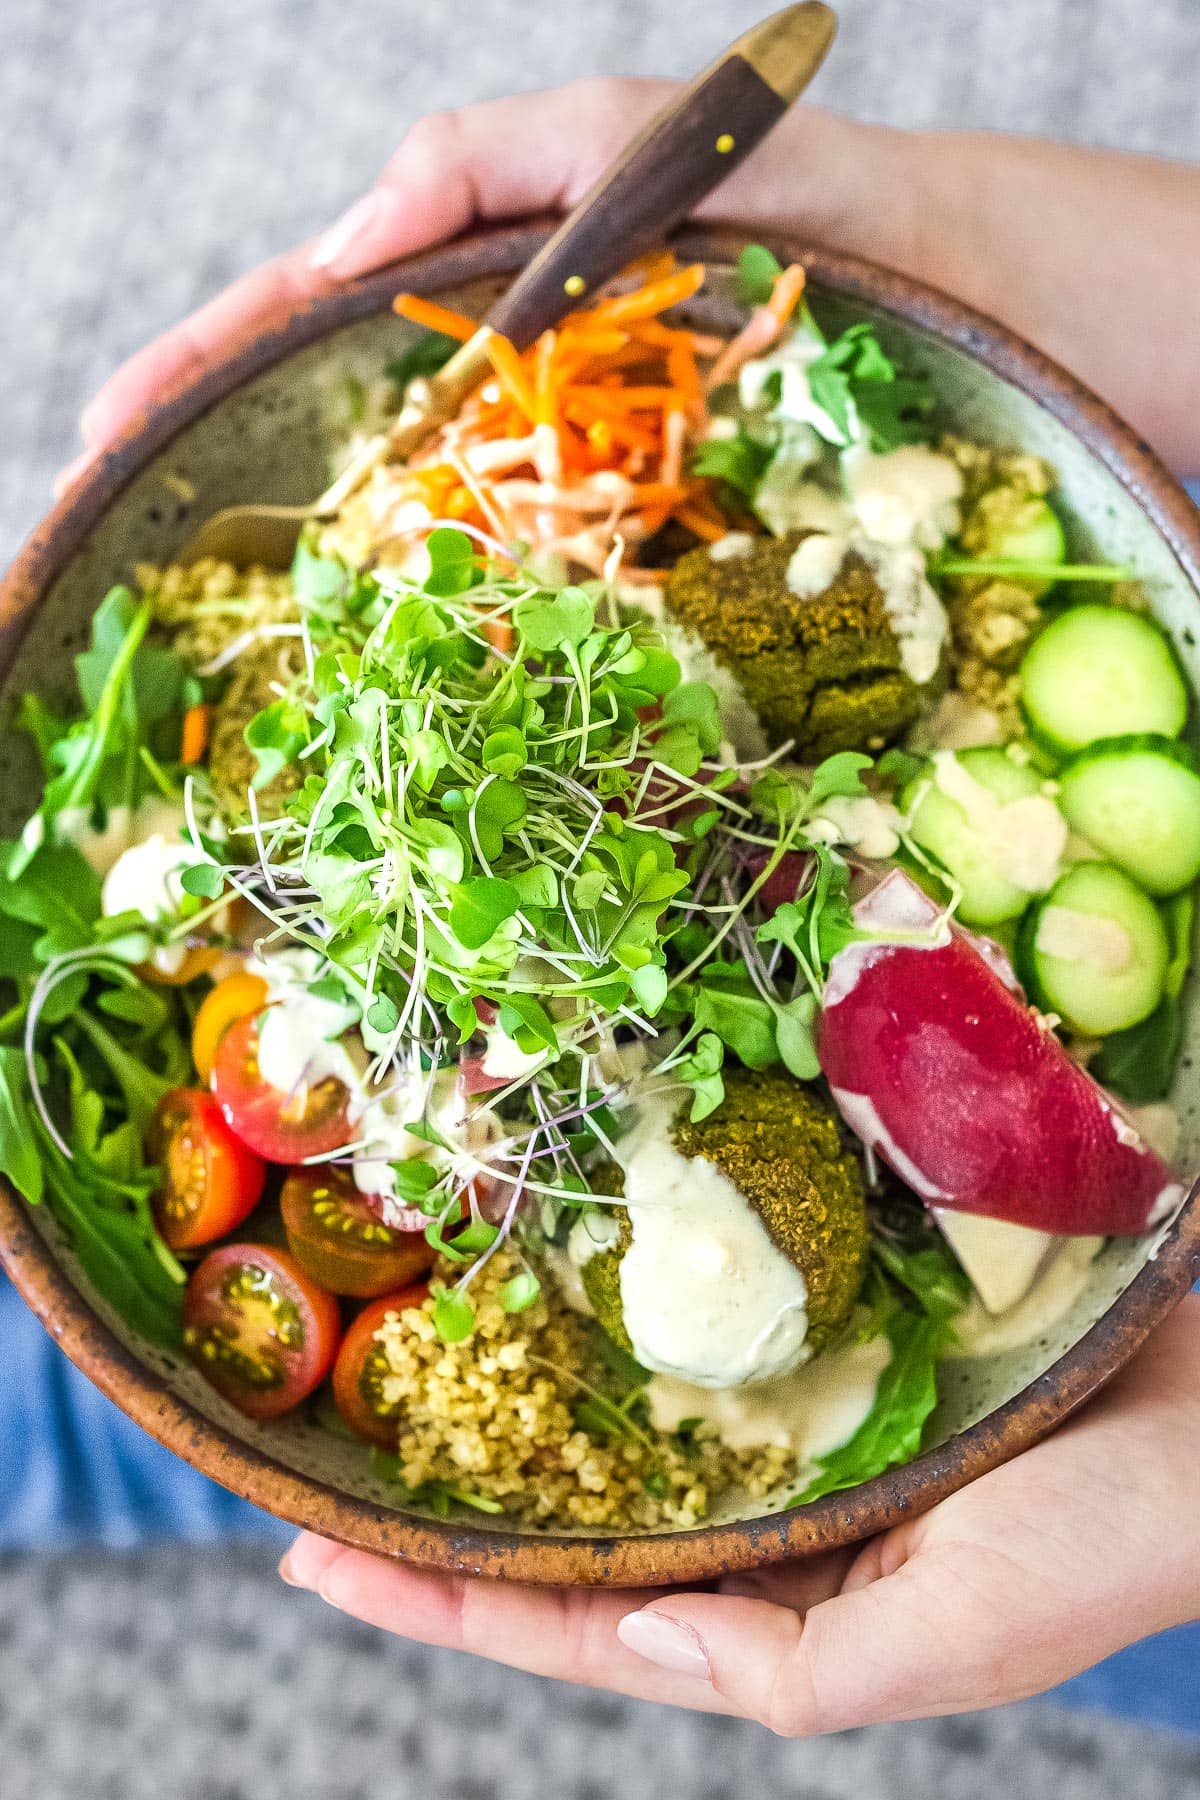 This Falafel Bowl  is full of so much goodness! Made with baked falafels, your choice of grain, lots of healthy veggies, olives, herbs and drizzled with tahini sauce. Prep the falafels ahead for the busy workweek.